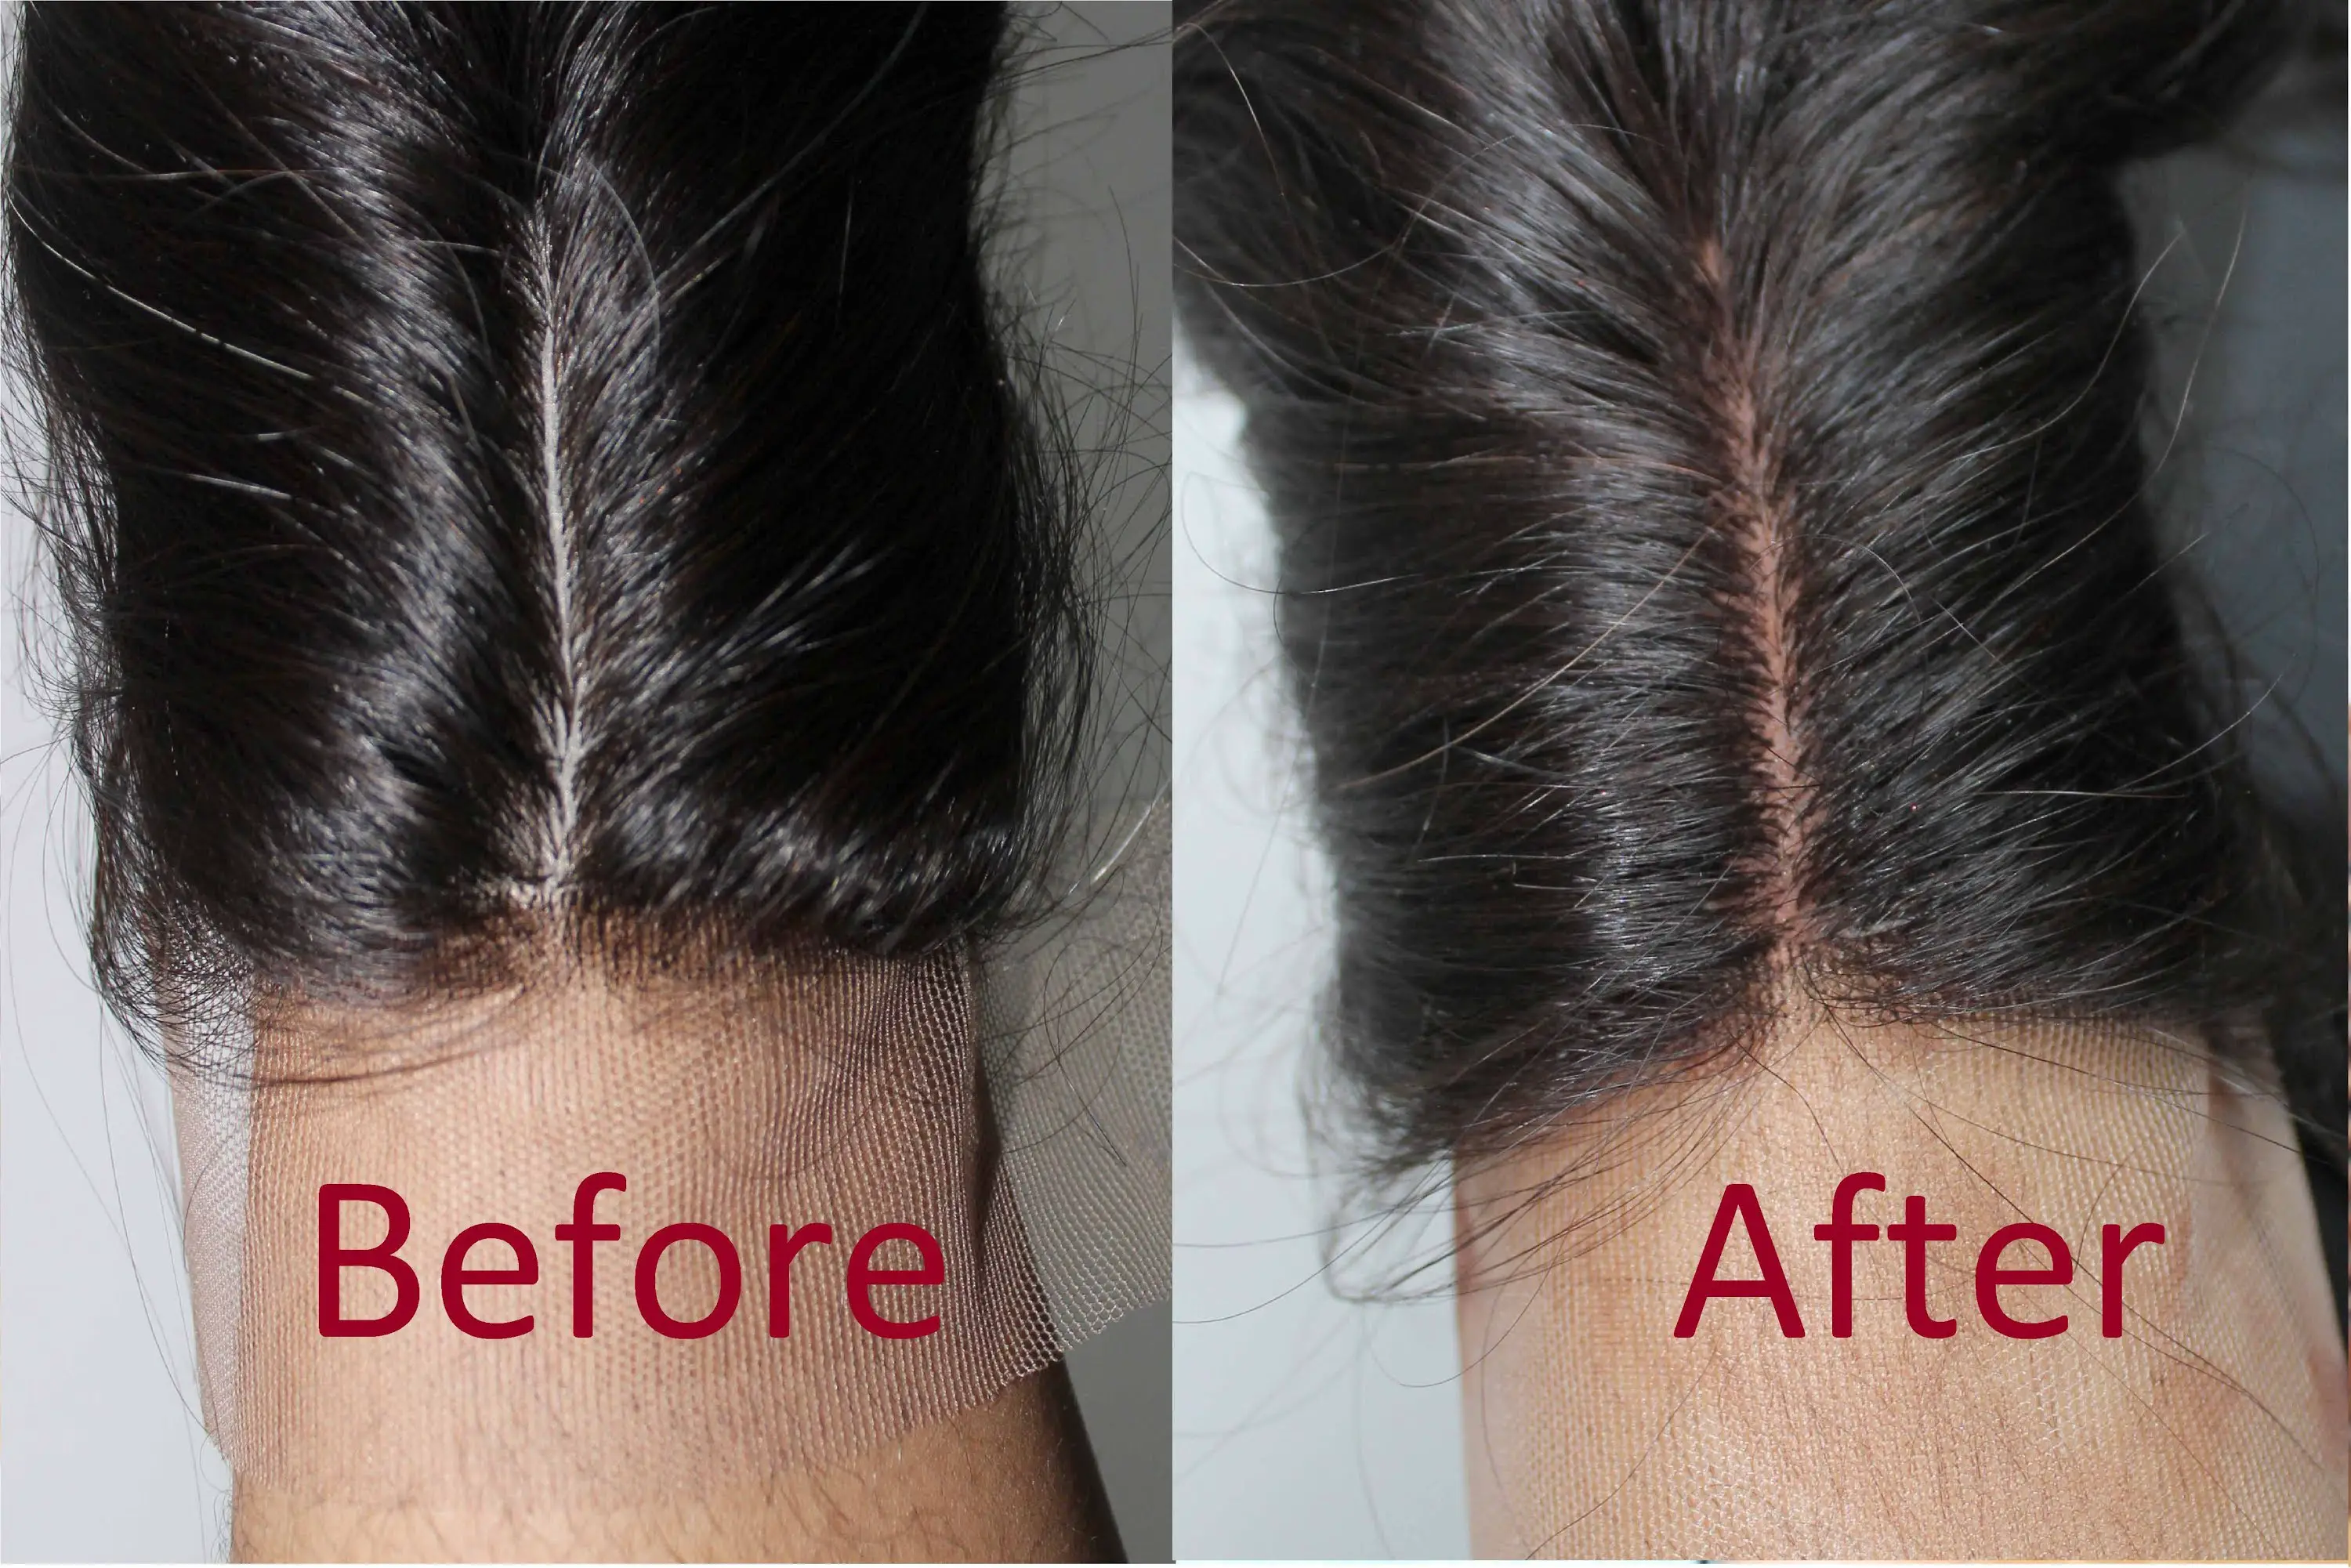 Video: Tint Your Lace Closure With Black Tea